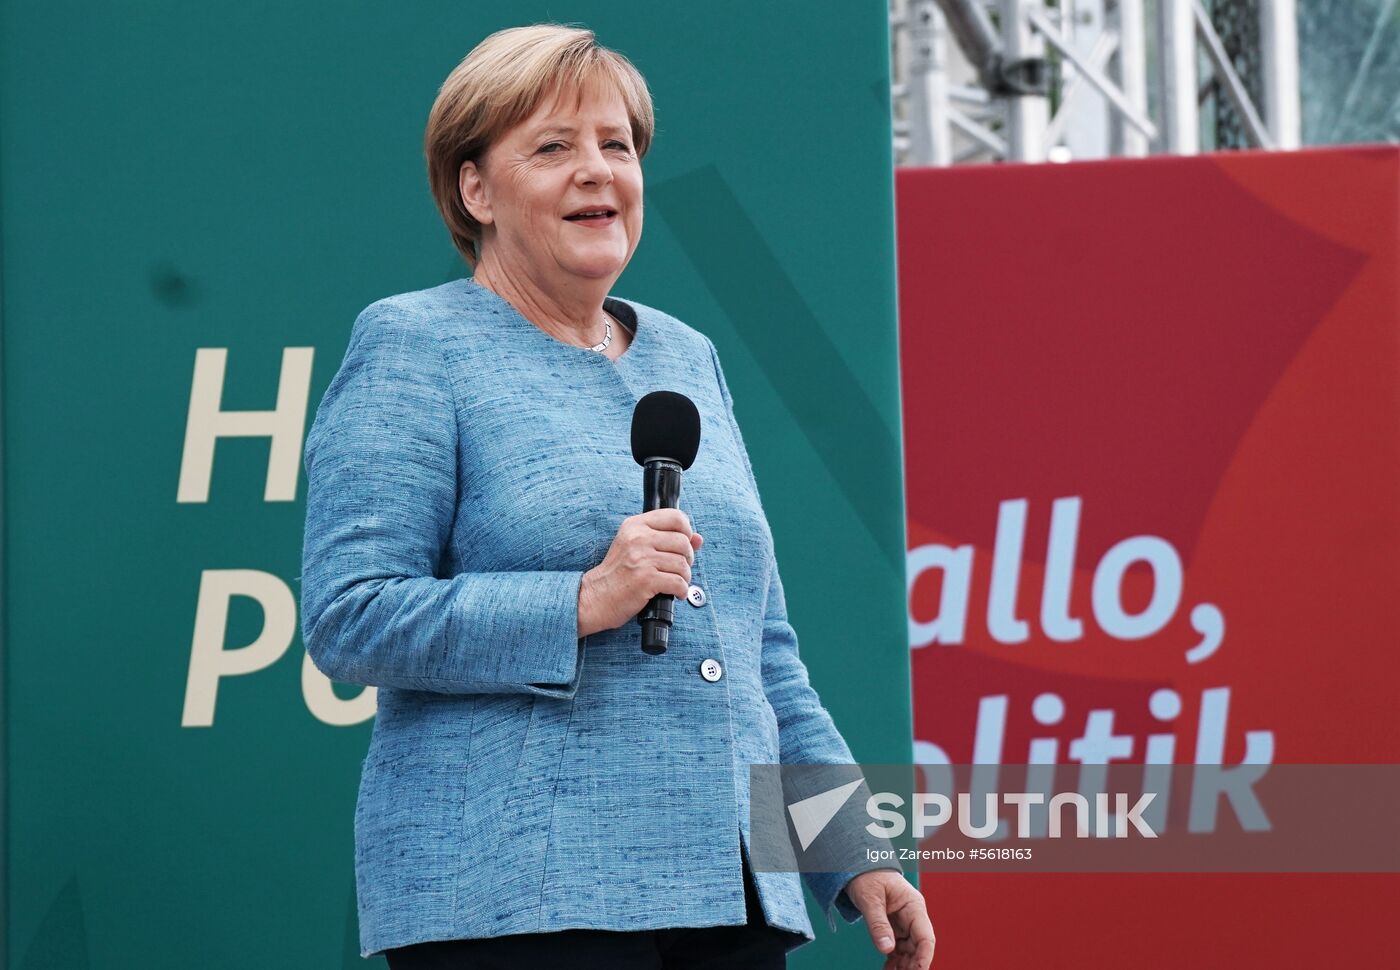 German Chancellor Merkel on Federal Government Open Day